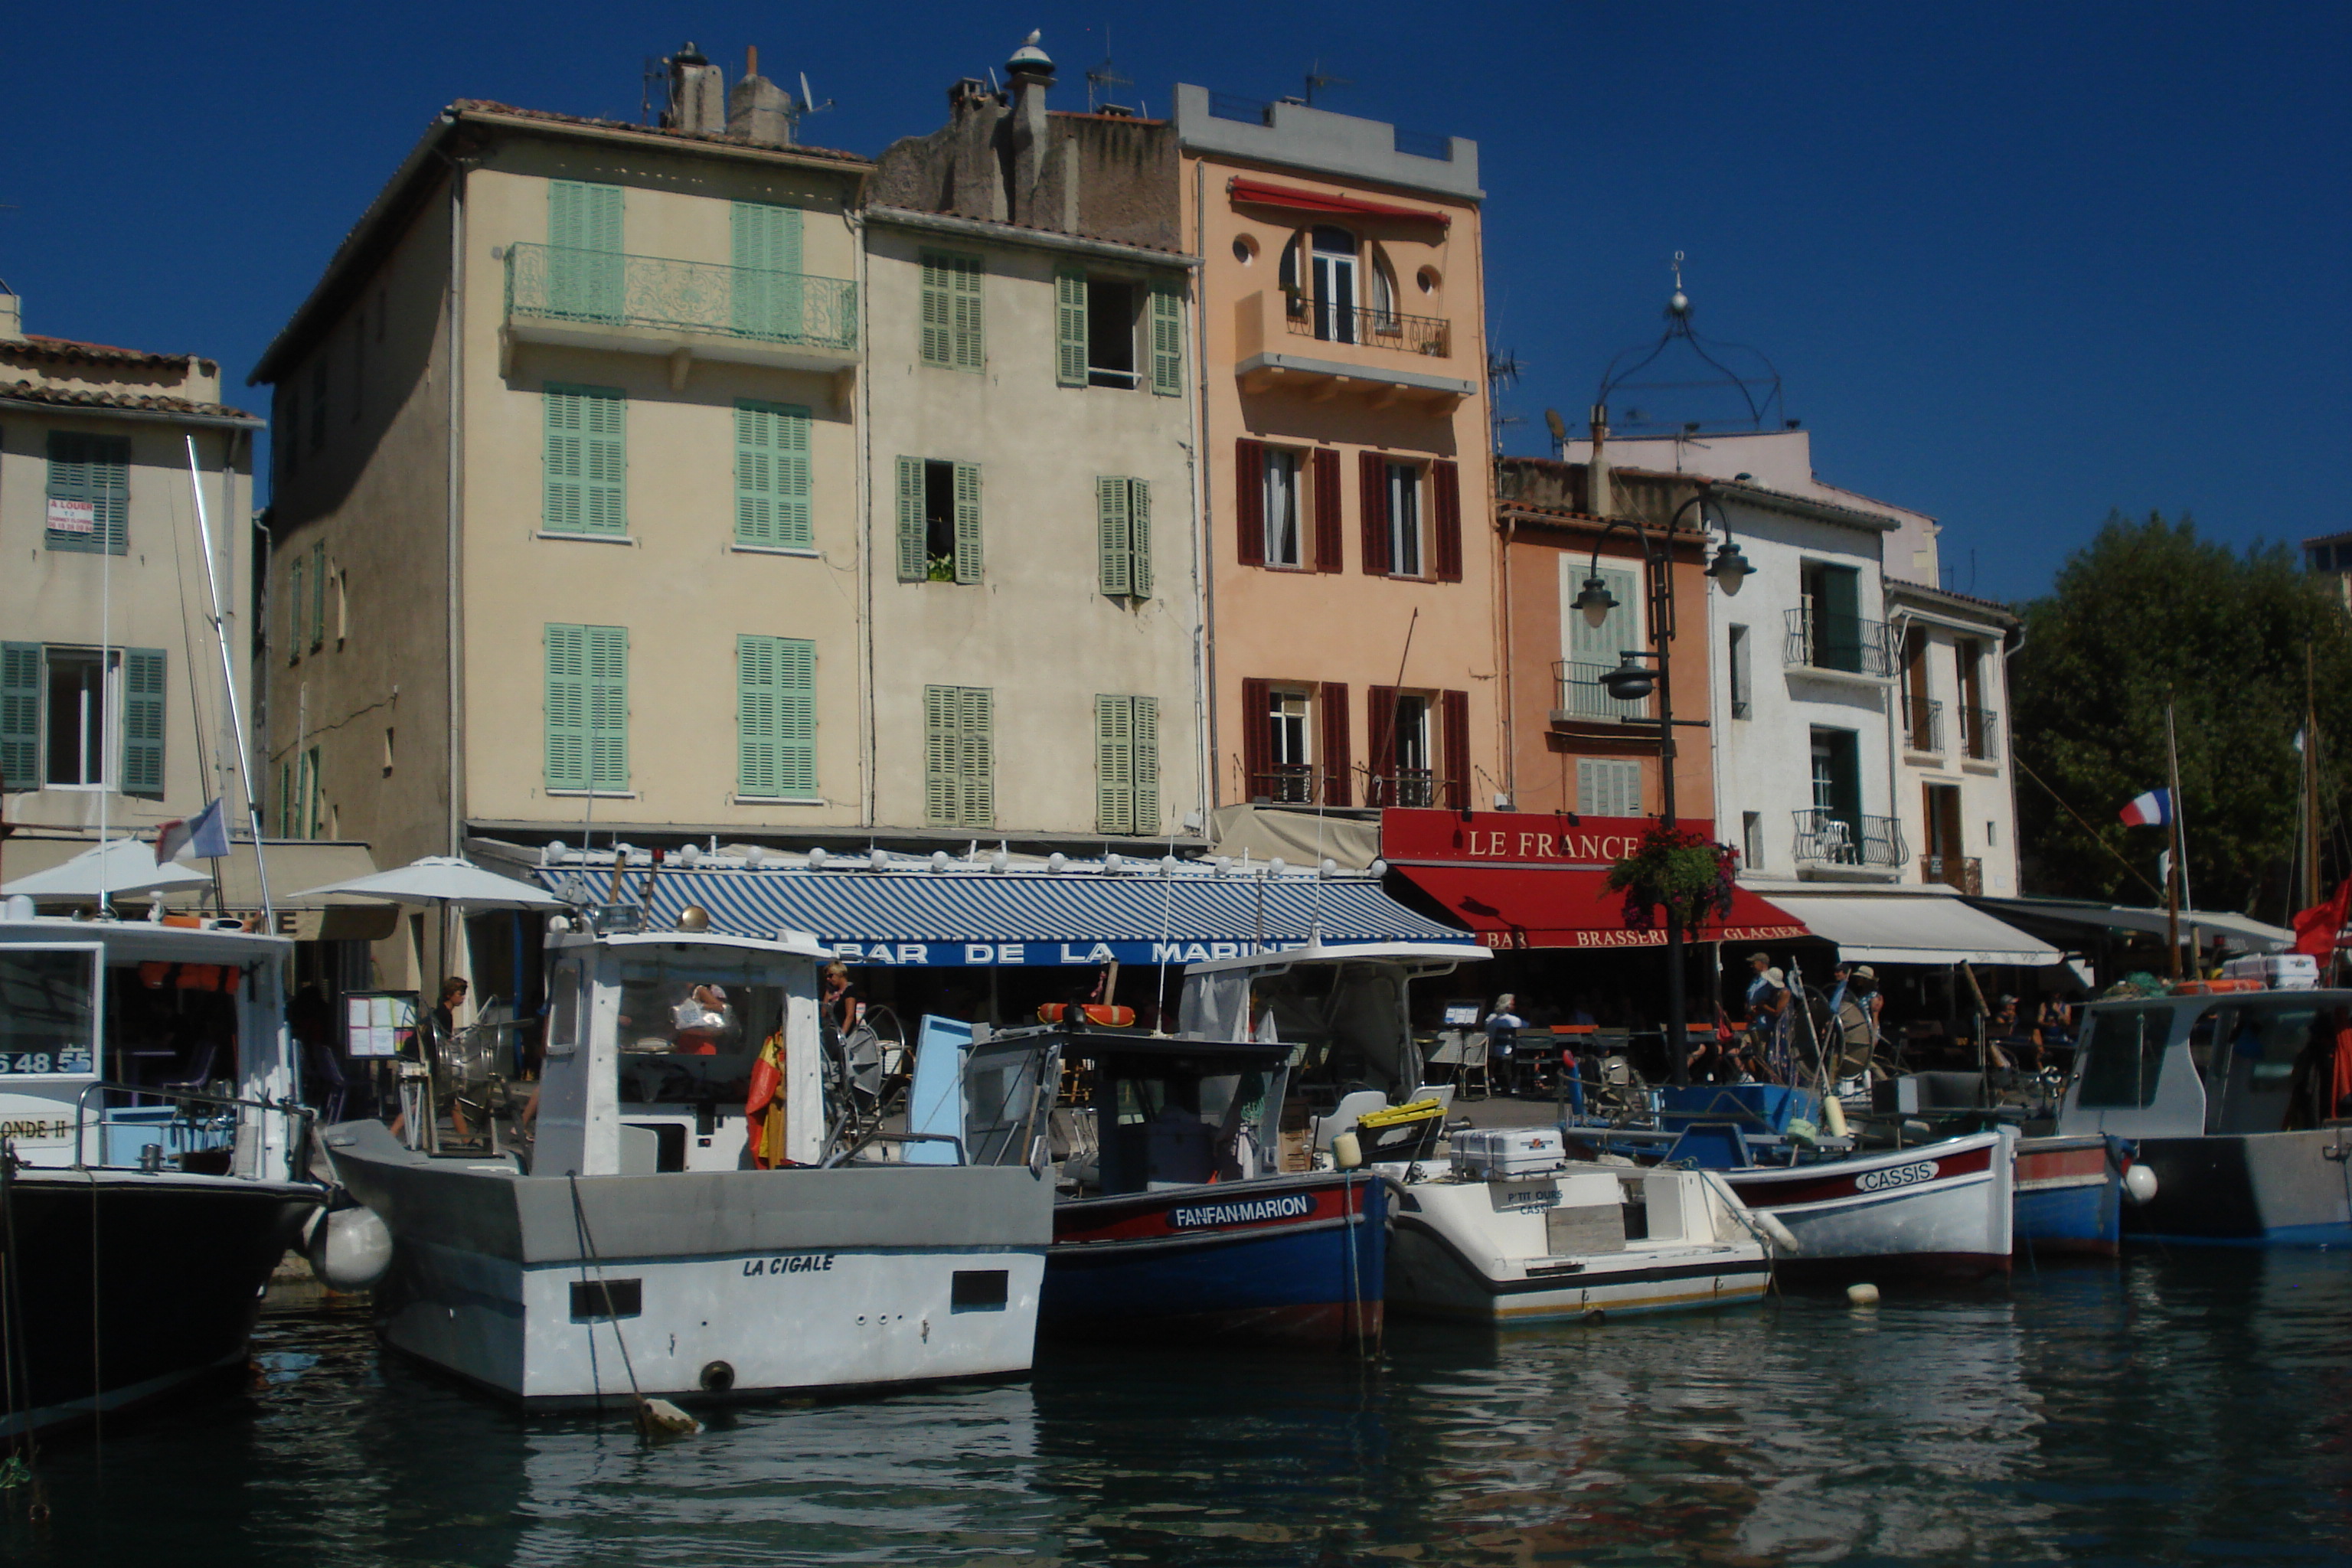 The Cassis, France, port is full of activity, with fishing boats and tourist vessels vying for position. (Photo by Lana Bandy)